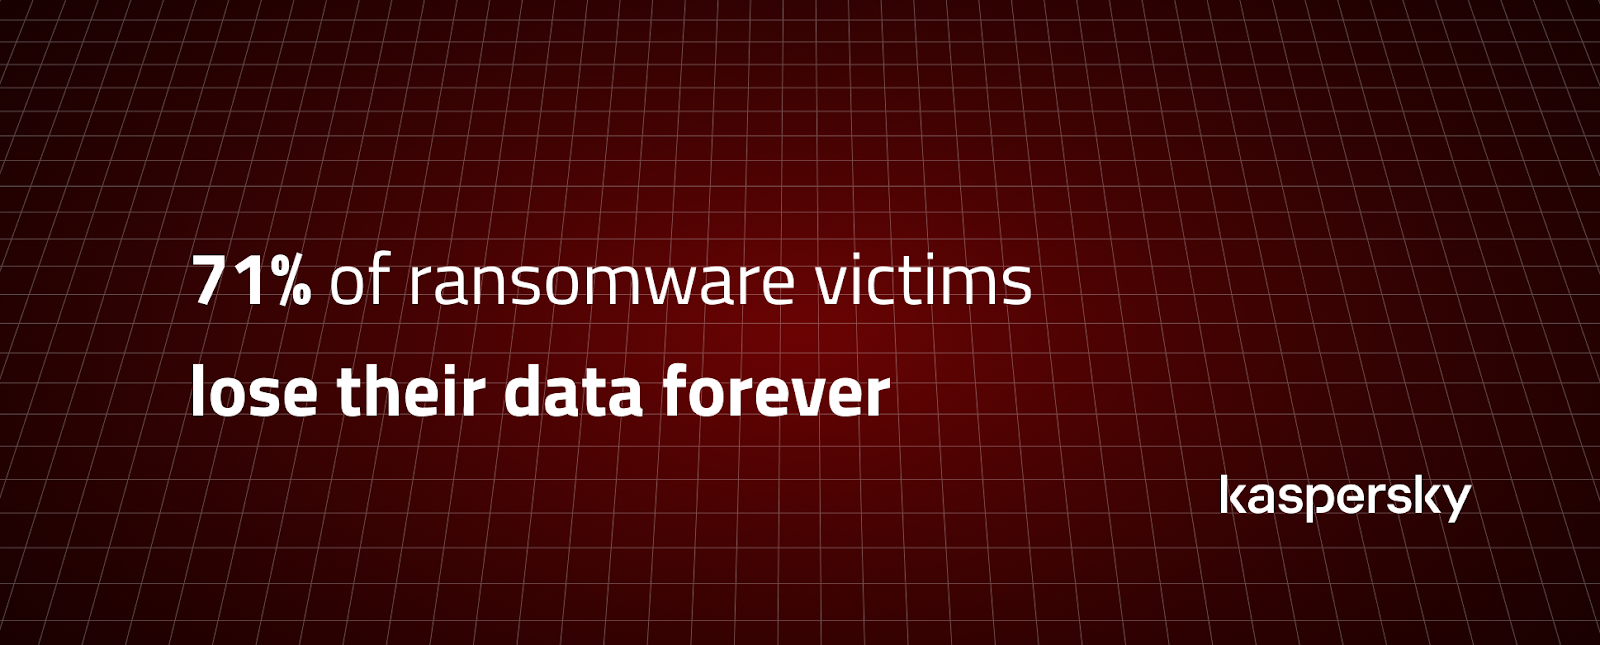 statistics by kaspersky of 71% of ransomware victims lose their data forever